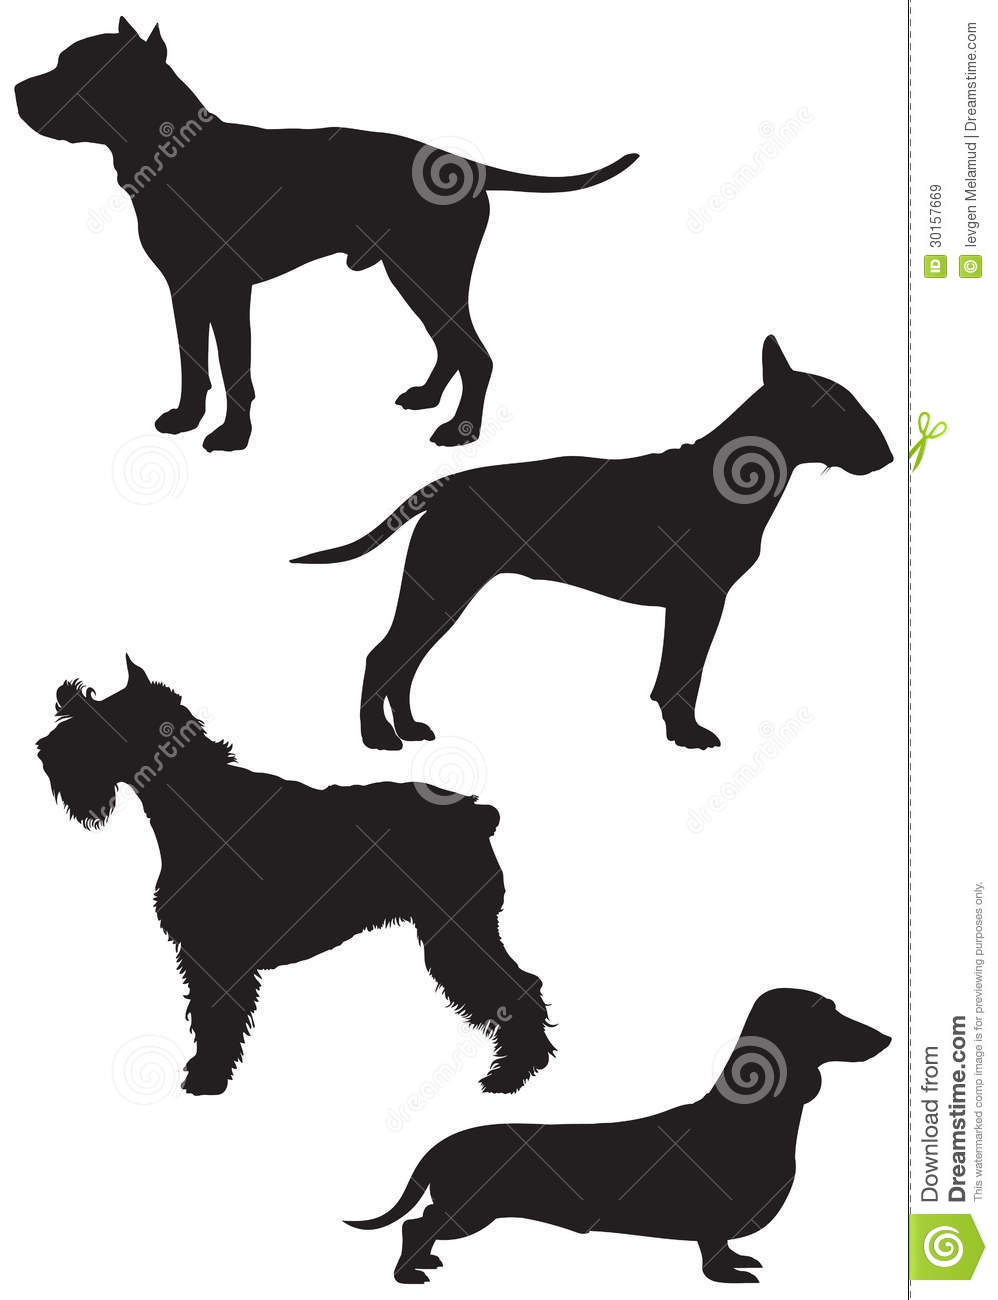 Related To Dachshund Illustrations And Clipart  744 Dachshund Royalty